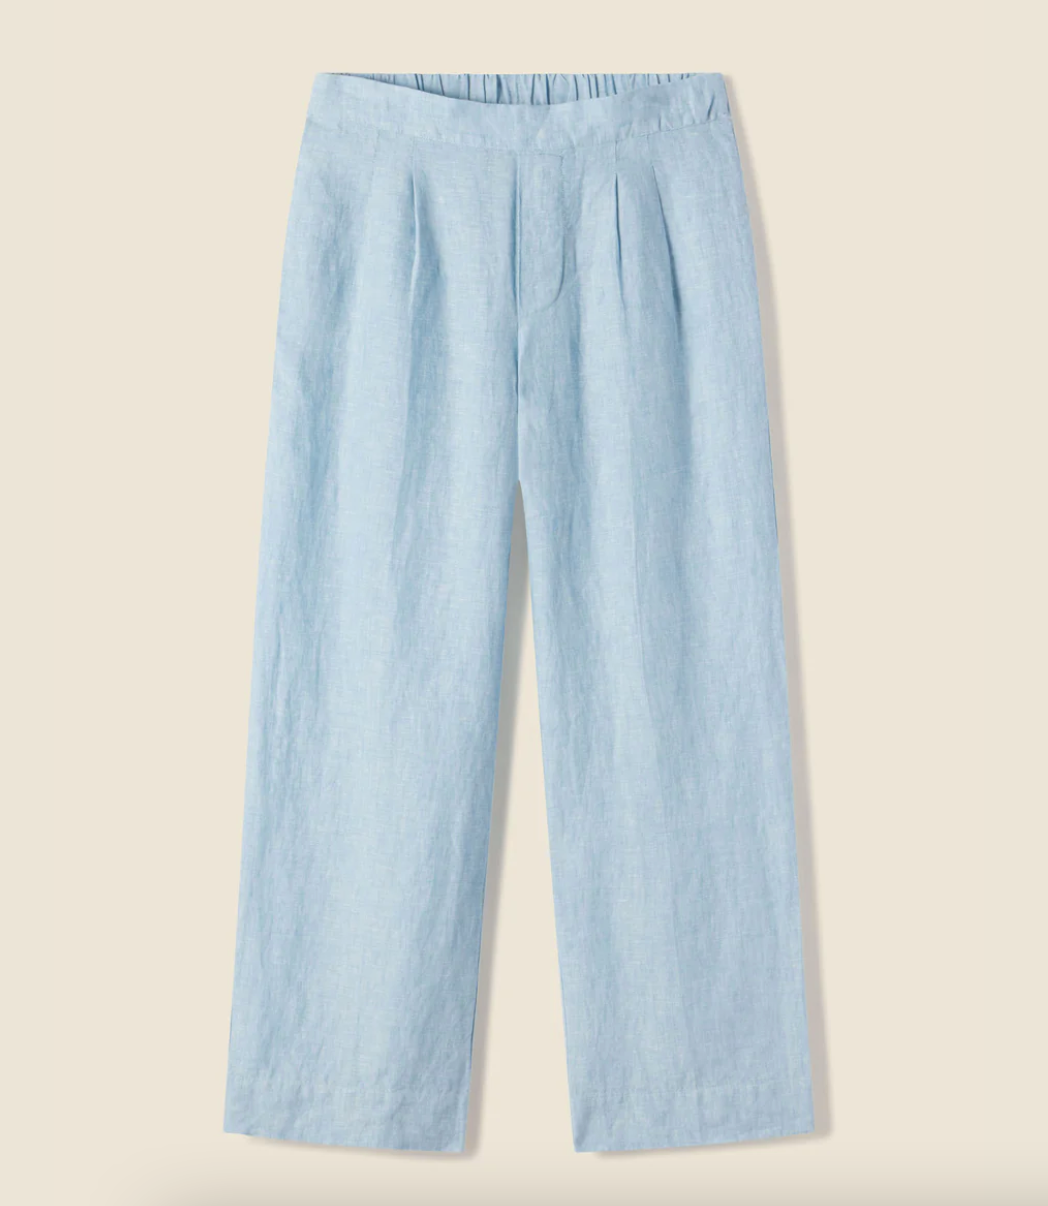 Sentence with replacement: The Trovata LEIGH PANT SKY LINEN displayed against a plain, light beige background. The pants feature a high waist, elastic waistband, and Arizona style.